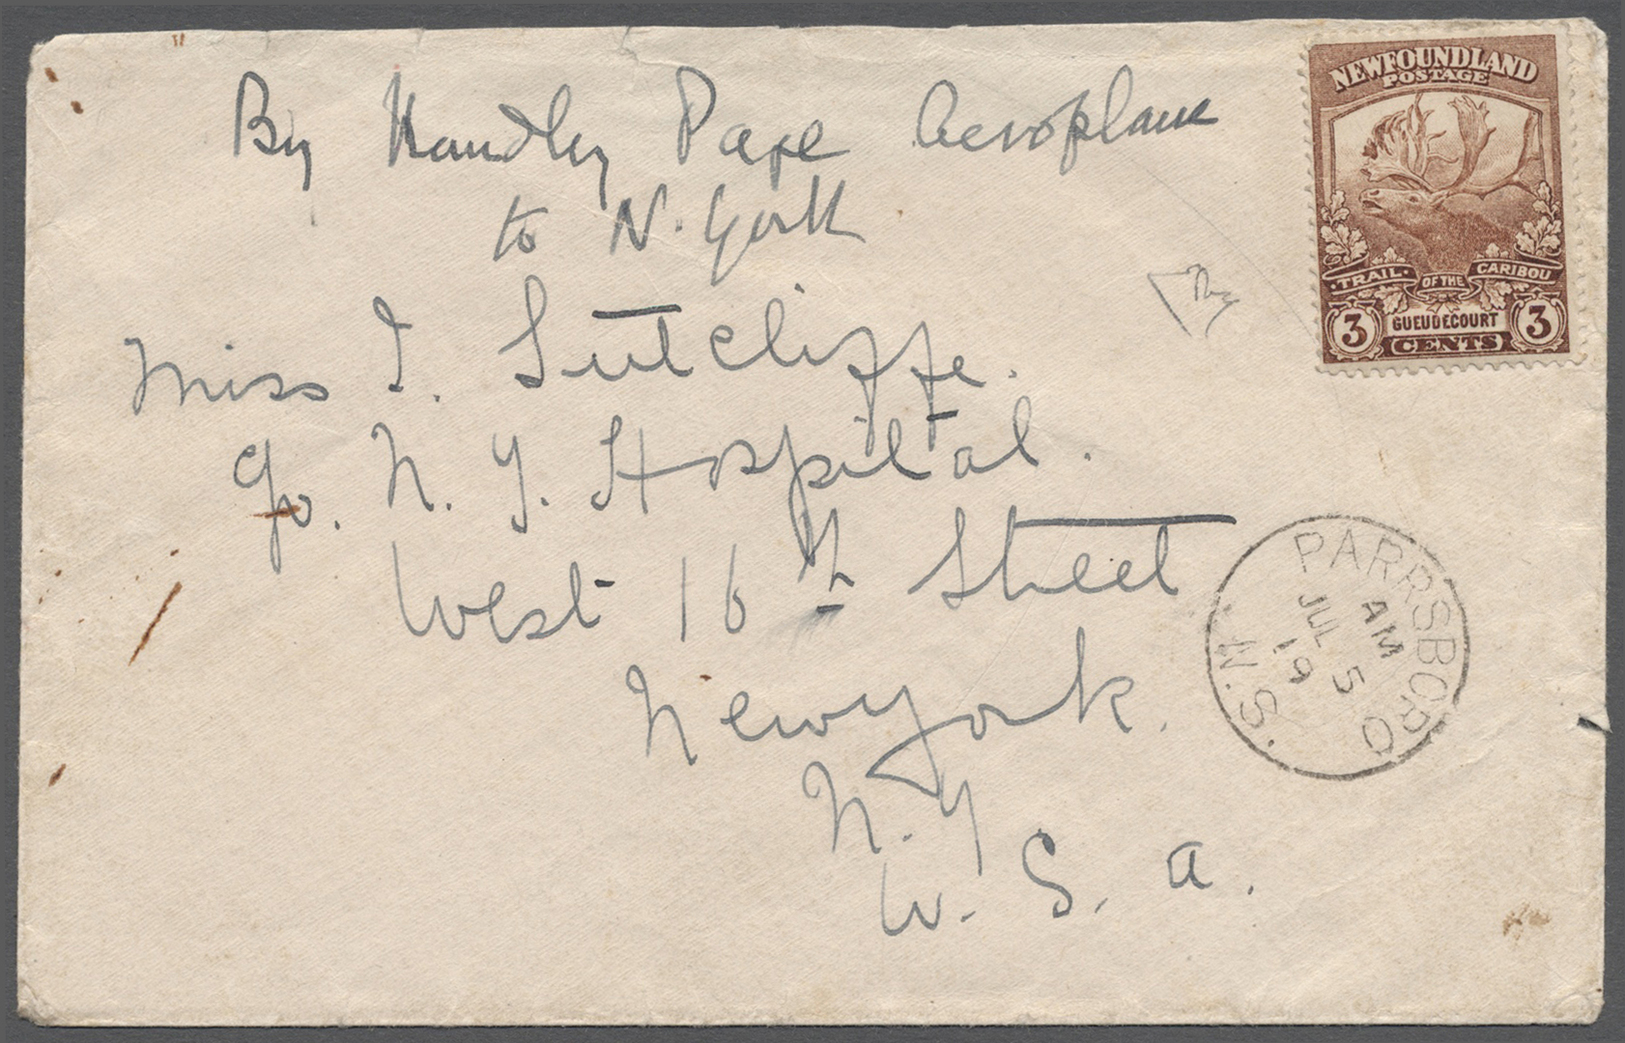 Br Neufundland: SUPPLEMENTARY MAIL „HANDLEY PAGE”: 1919, Unoverprinted Caribou 3 C. Brown Without Cancel On Flight Cover - 1857-1861